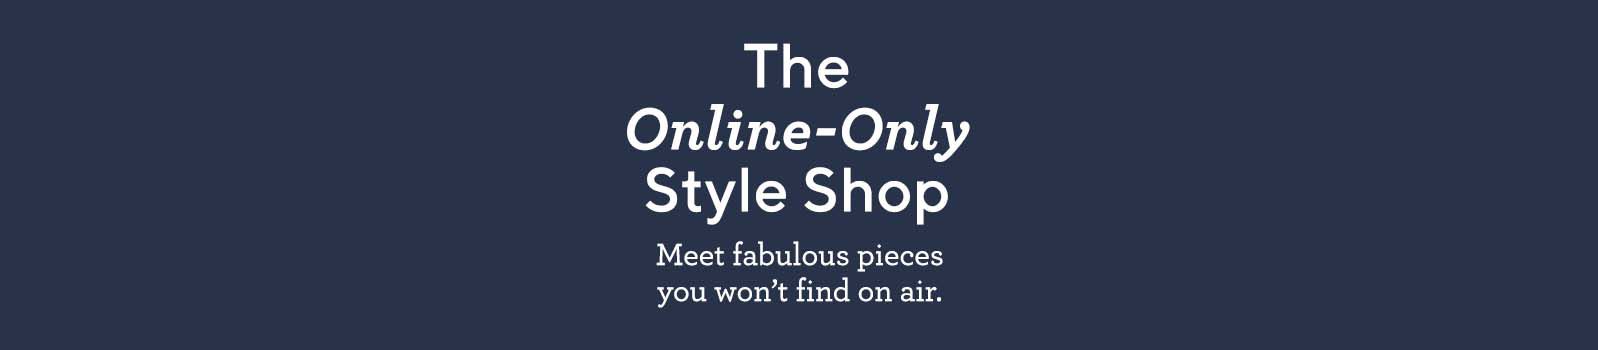 The Online-Only Style Shop - Meet fabulous pieces you won't find on air